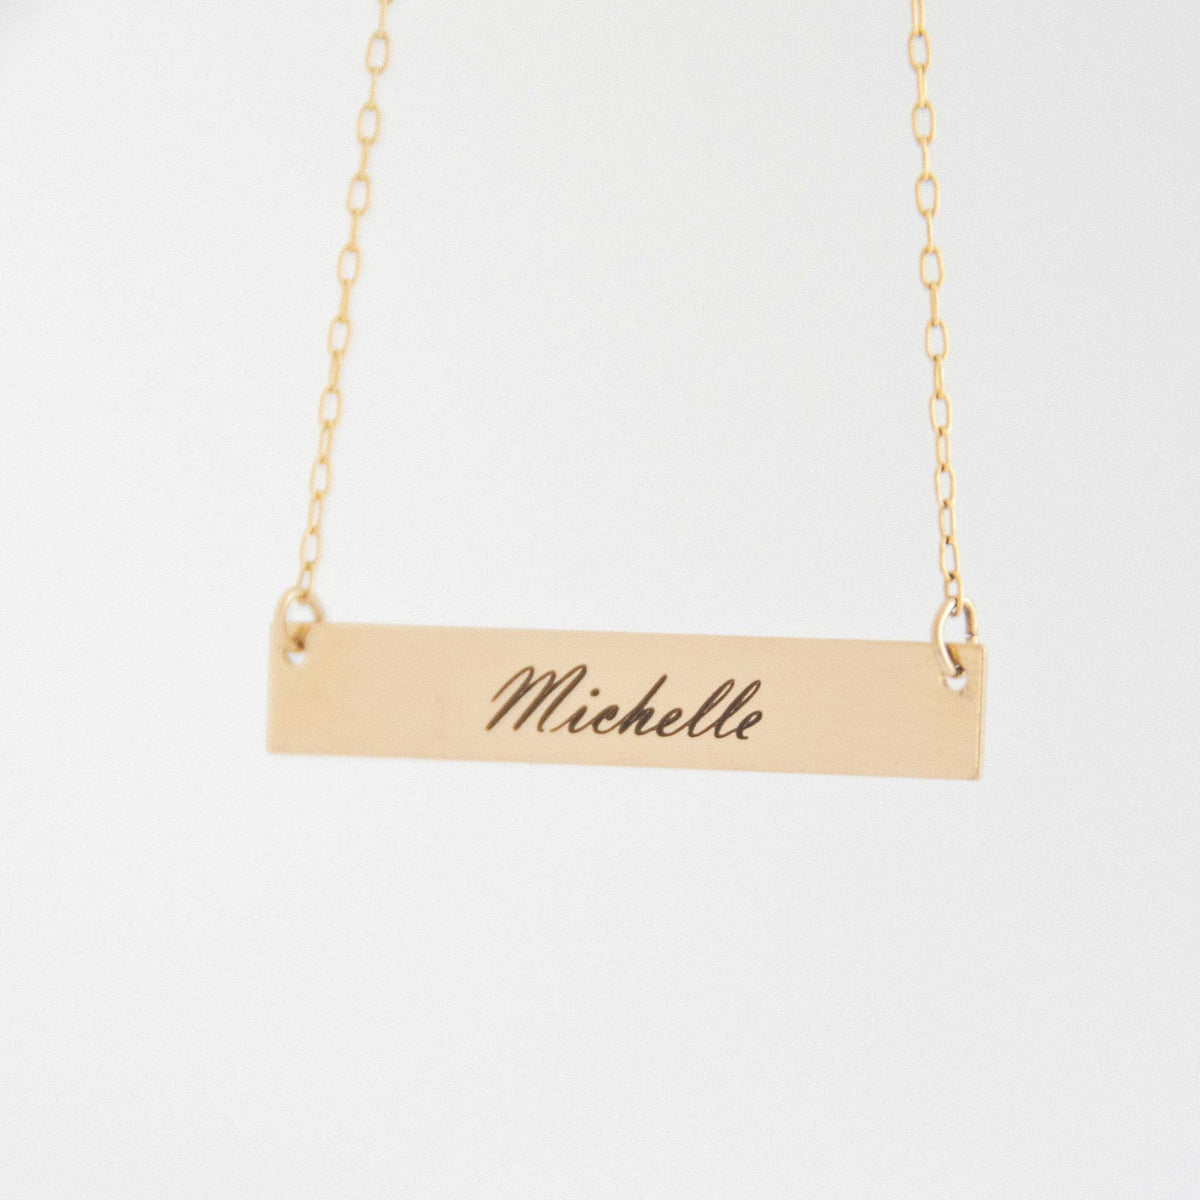 The rectangle bar necklace with Michelle engraved with script font in front of a white background. 